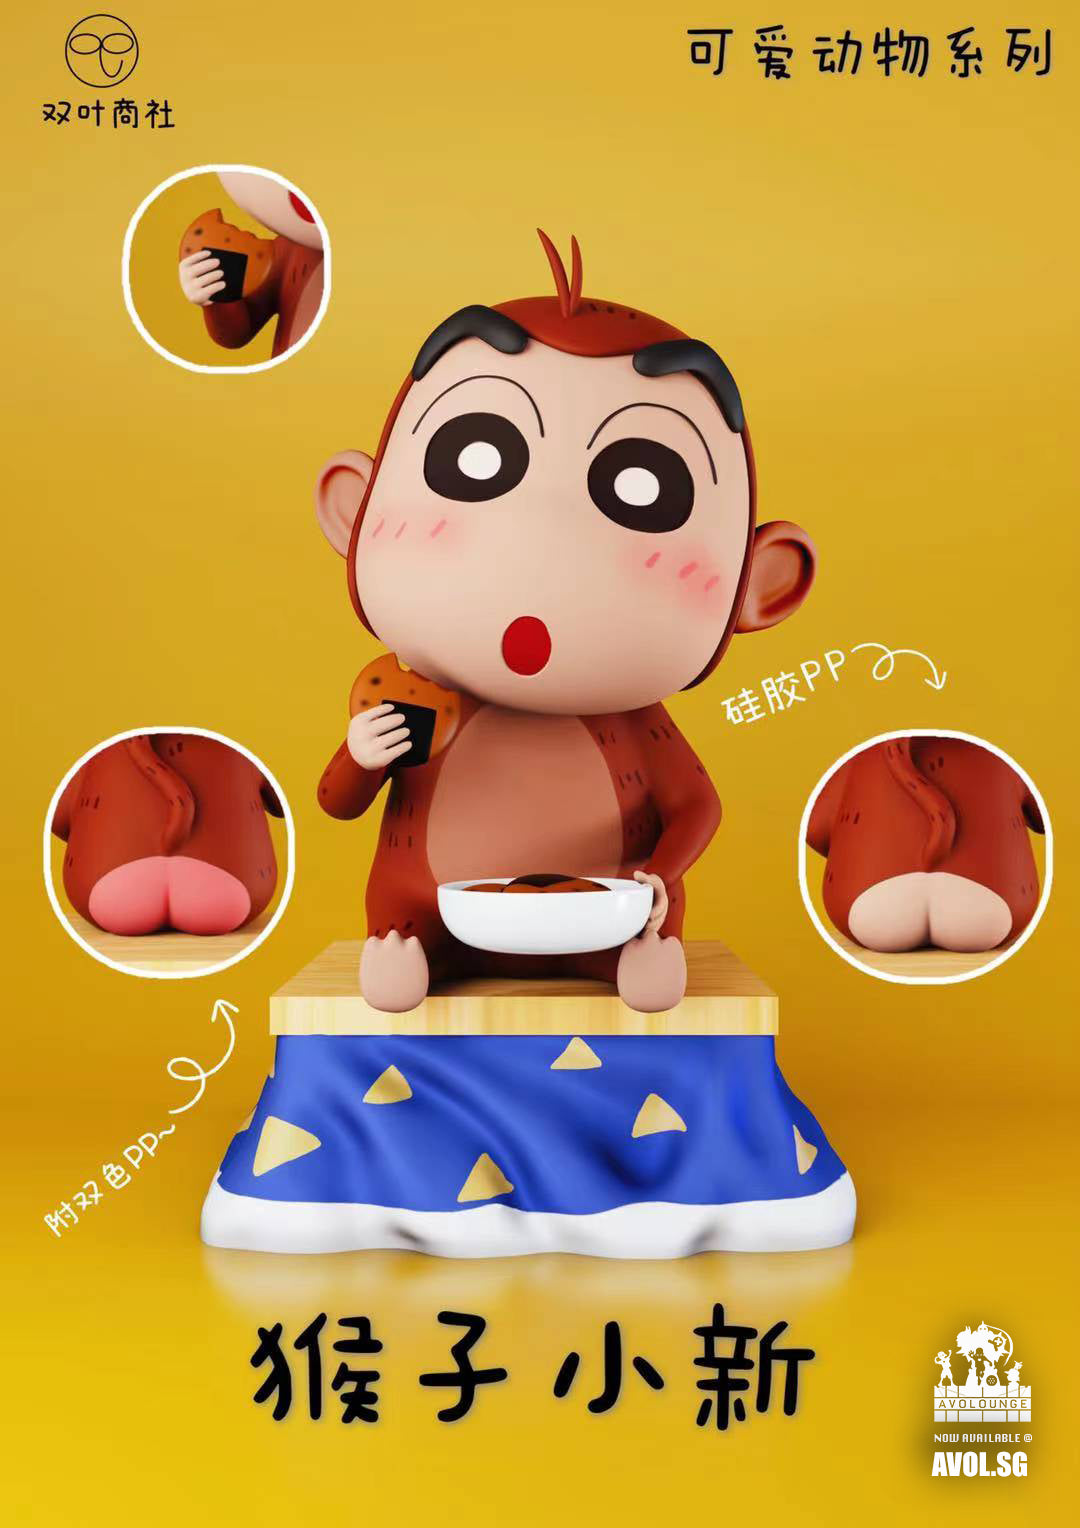 I OPENED Millionaire Monkey Mart with SHINCHAN and CHOP, PART 2